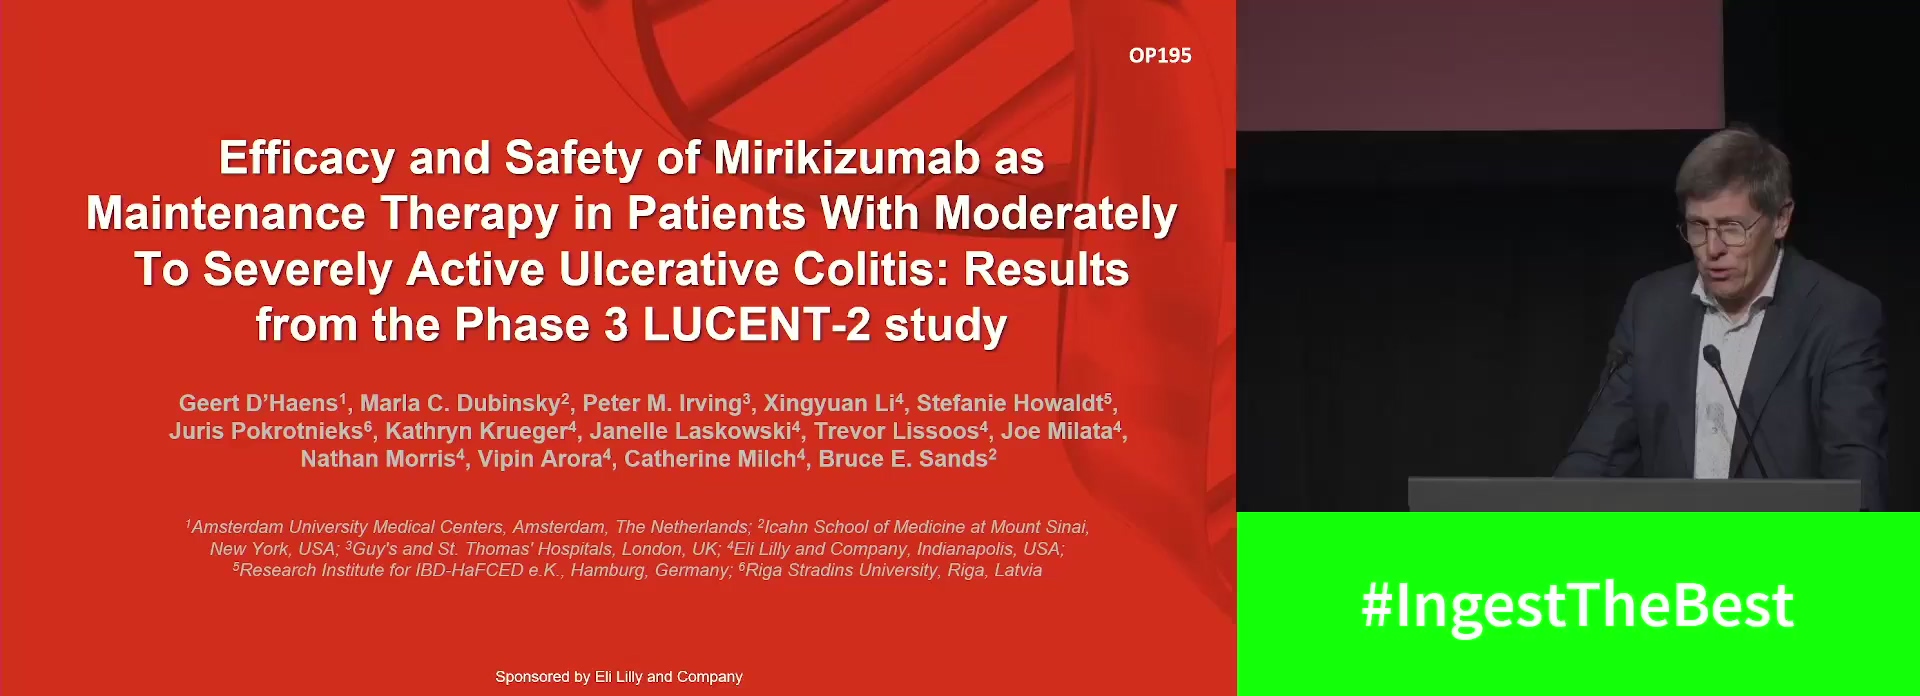 EFFICACY AND SAFETY OF MIRIKIZUMAB AS MAINTENANCE THERAPY IN PATIENTS WITH MODERATELY TO SEVERELY ACTIVE ULCERATIVE COLITIS: RESULTS FROM THE PHASE 3 LUCENT-2 STUDY